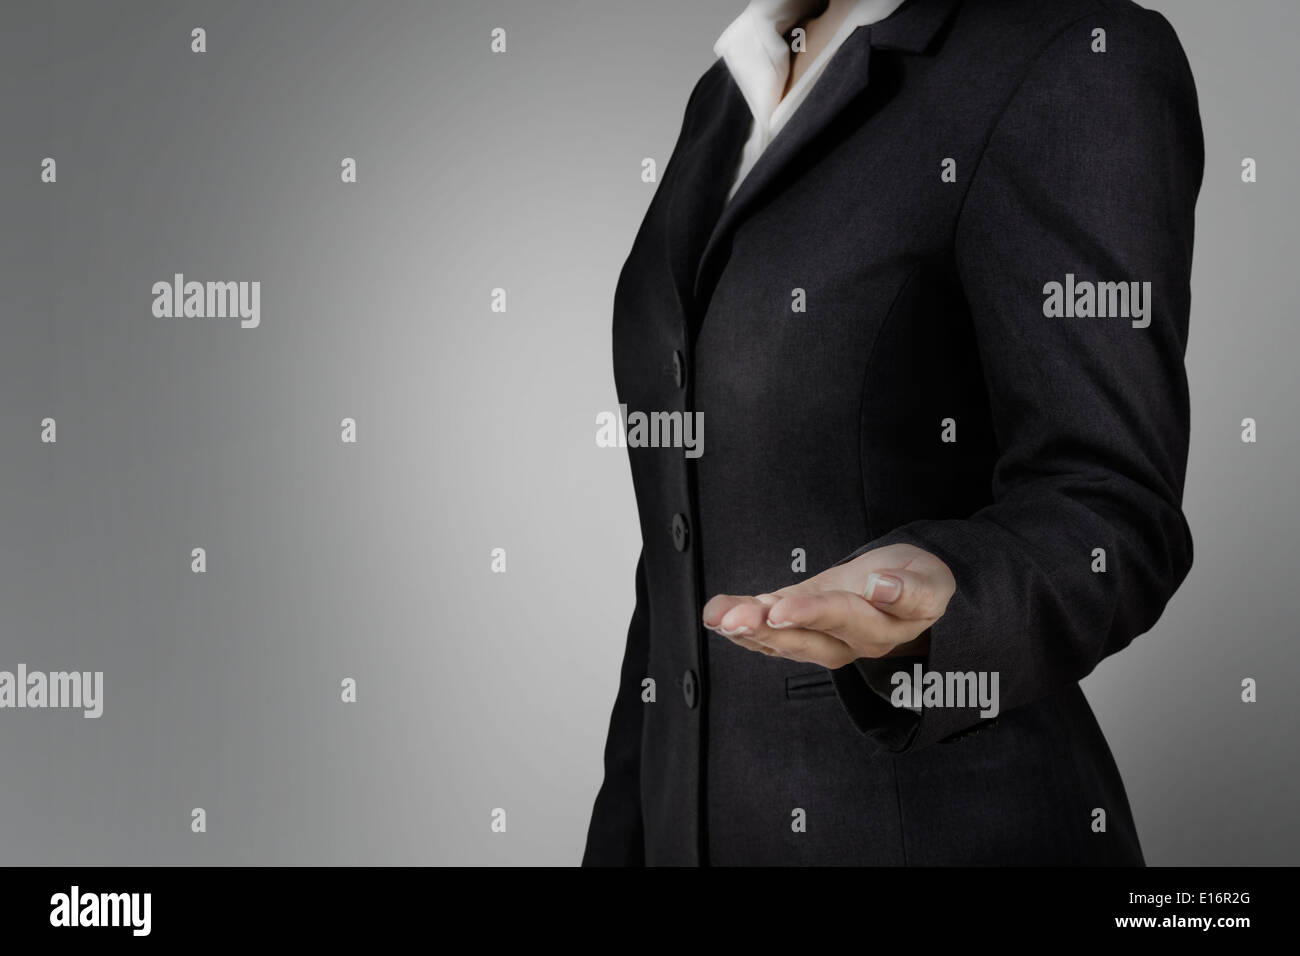 Open hand of business woman Stock Photo